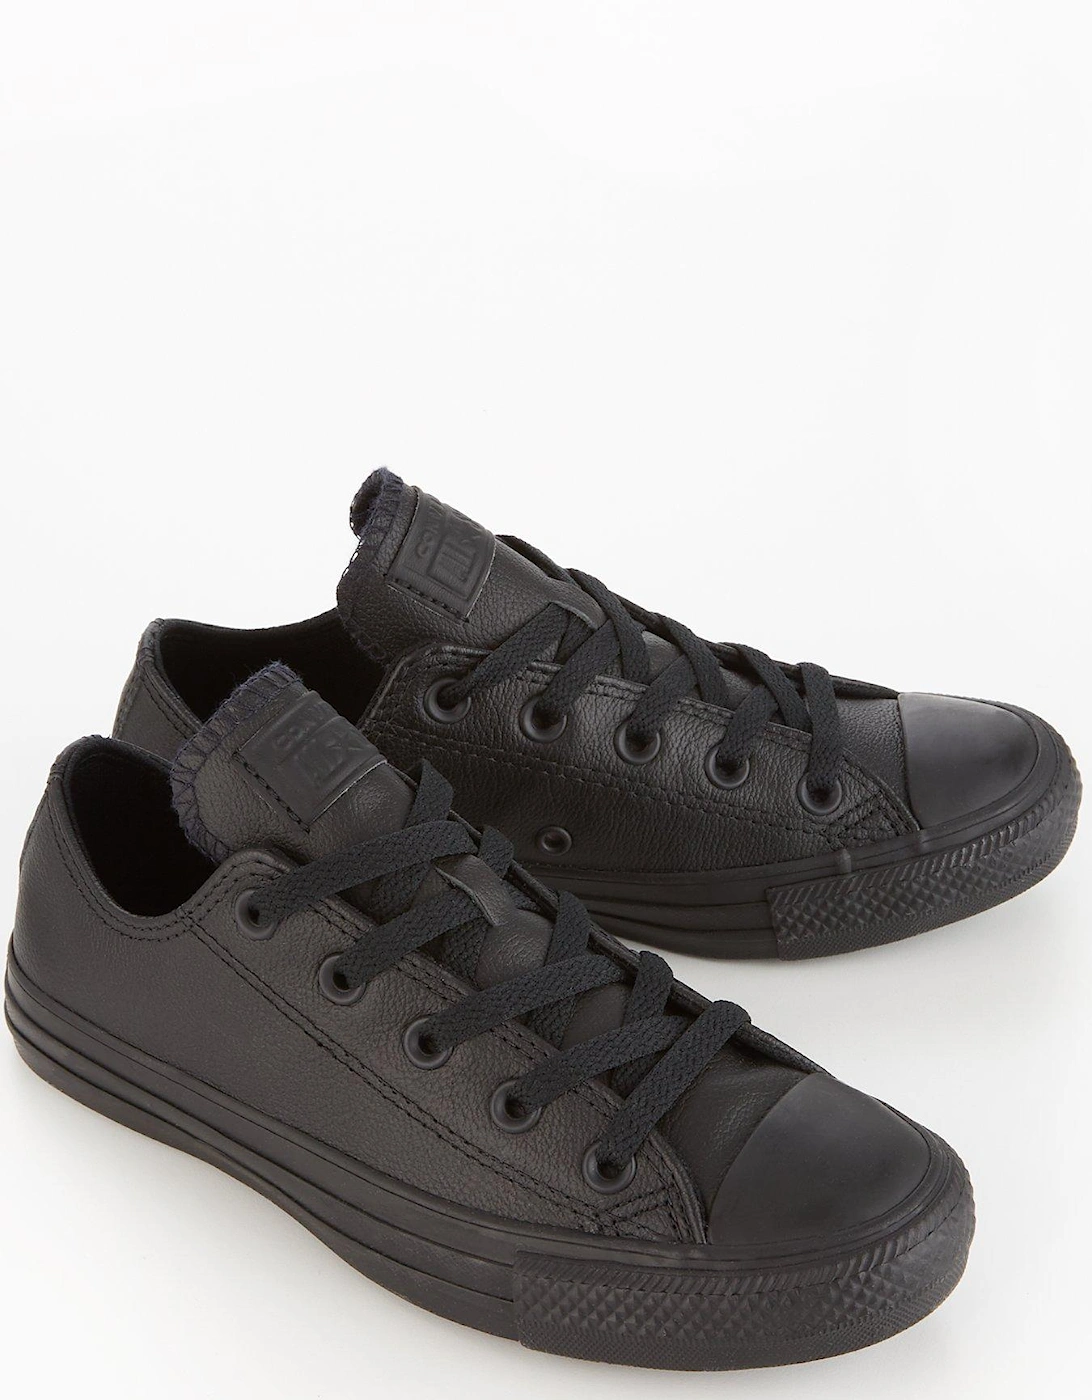 Unisex Leather Ox Trainers - Black